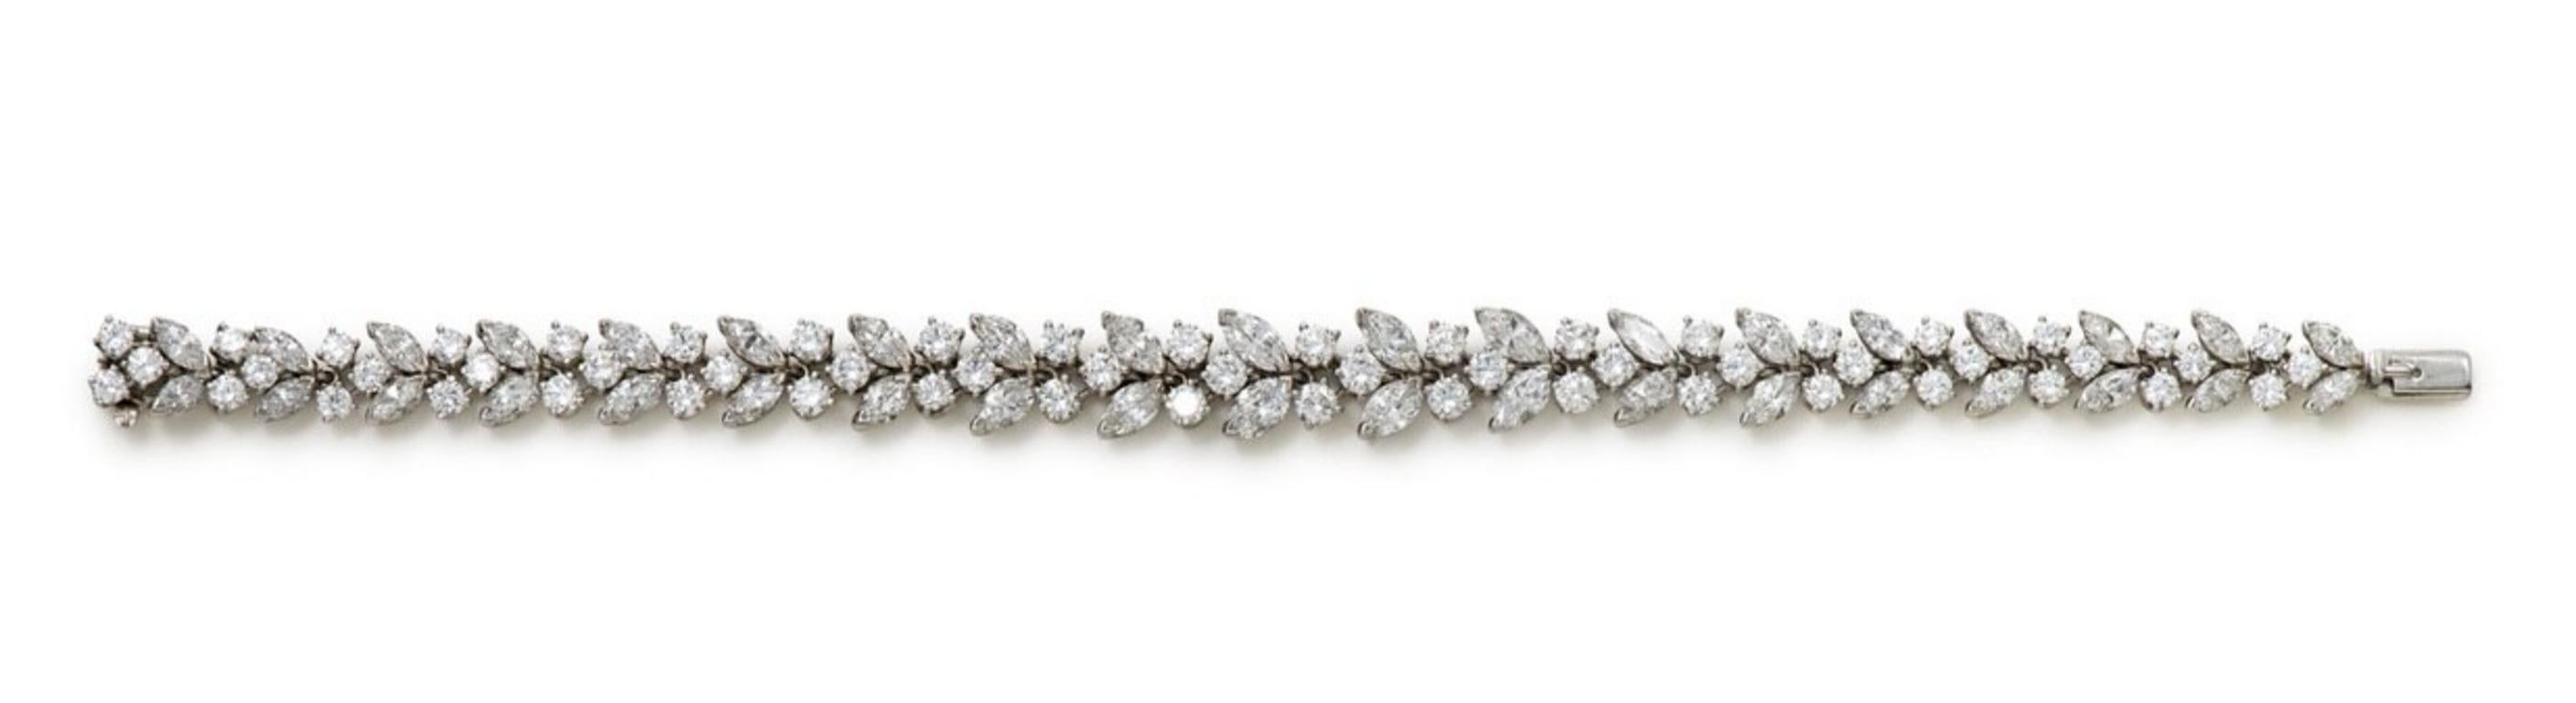 One of the most exquisite diamond bracelets we have owned recently! Made by Van Cleef and Arpels in the 1960's, the platinum bracelet features 95 marquise and round brilliant cut diamonds set in a line and graduating out from the center in either